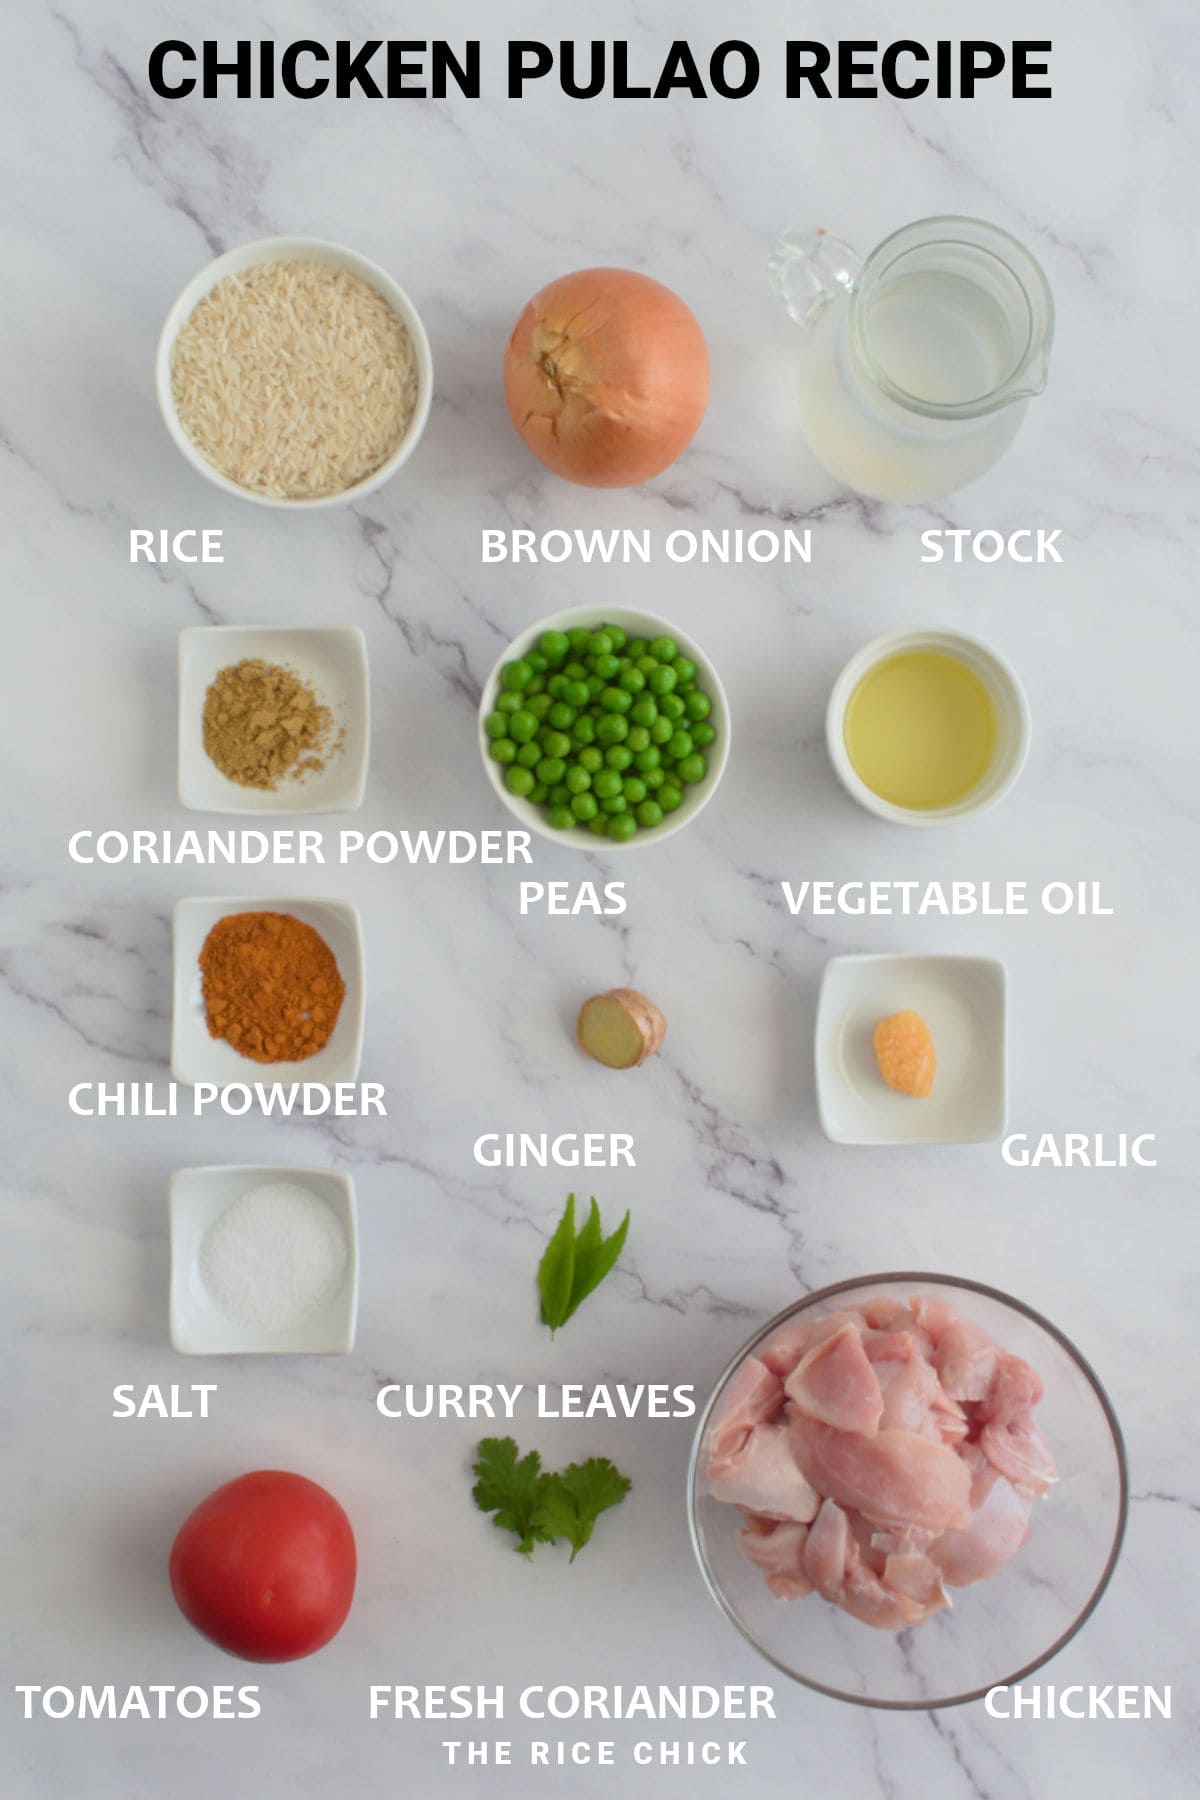 Ingredients for chicken pulao.